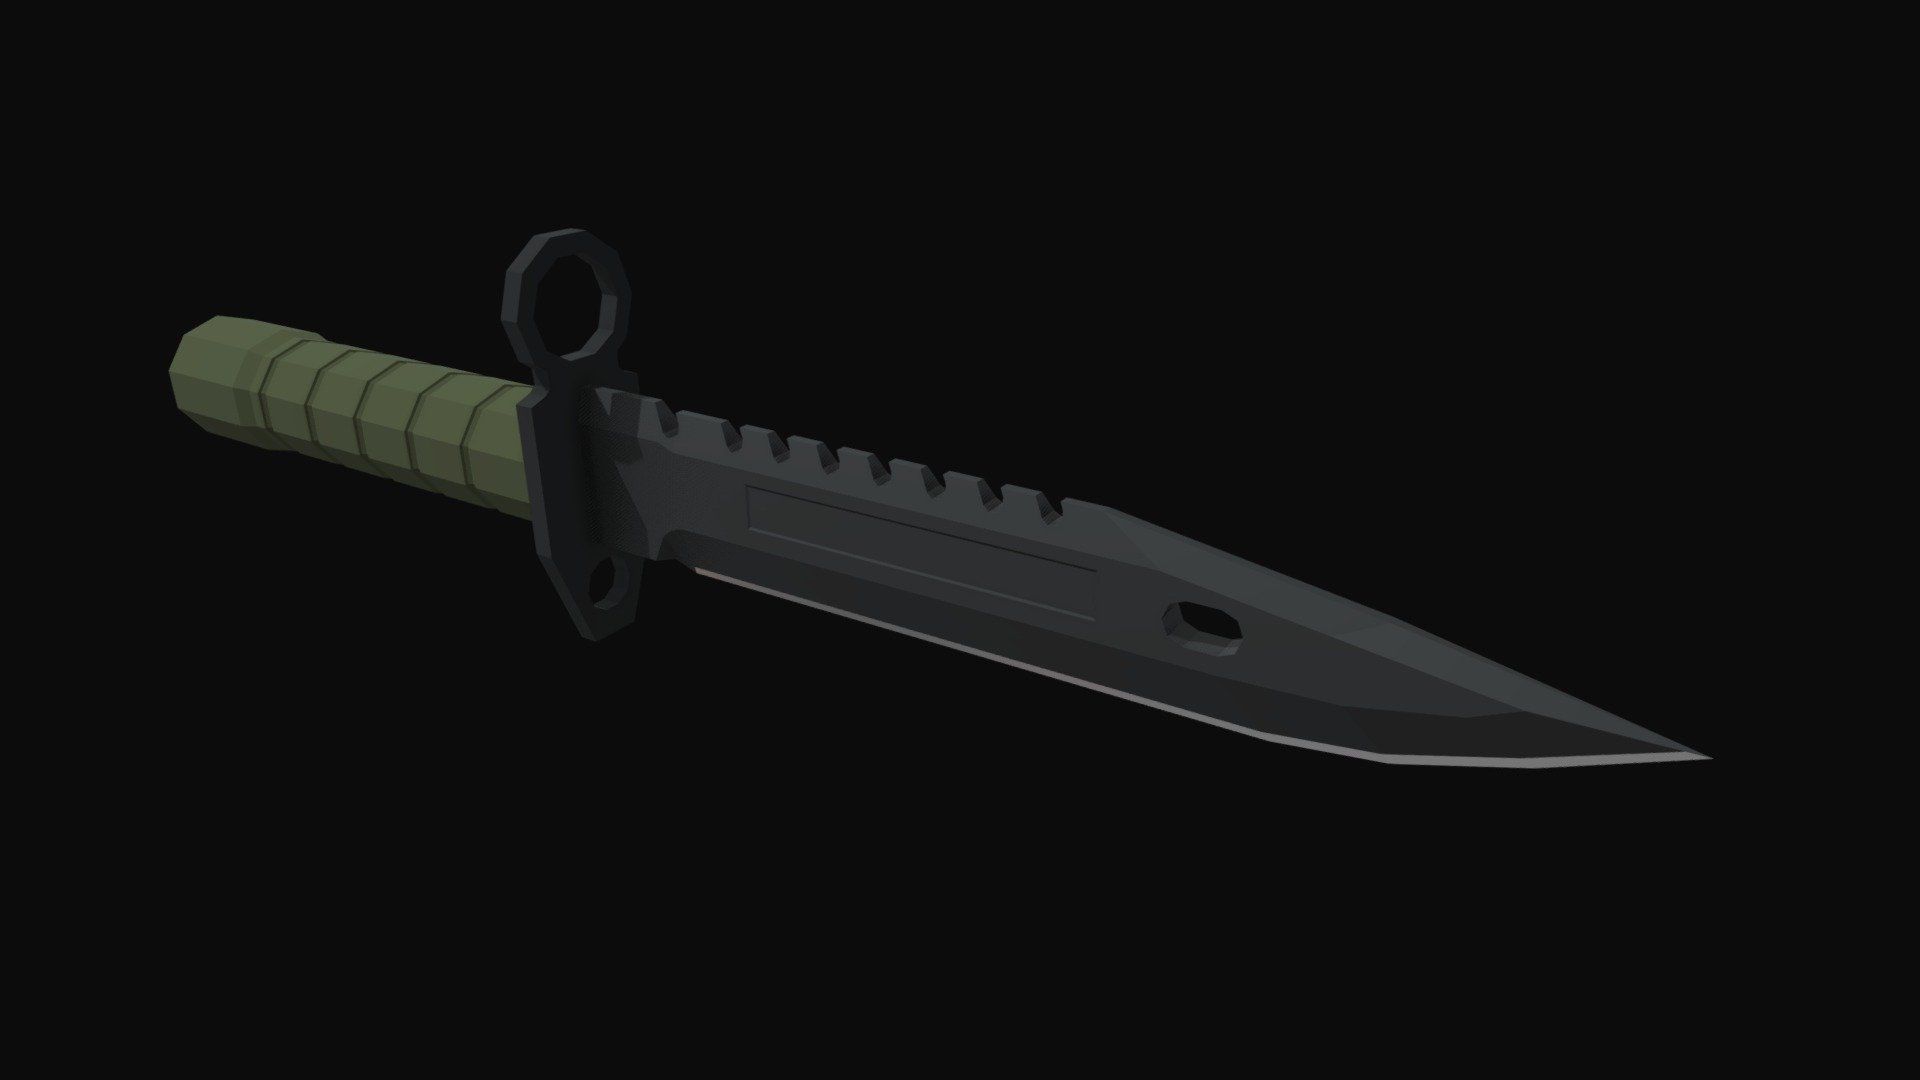 A low poly model of a M9 Bayonet

Ideal for for use in games

Tested in unity

Made in blender

Comes as a single .blend file - Low Poly M9 Bayonet - Buy Royalty Free 3D model by BundemGames (@BundemG) 3d model